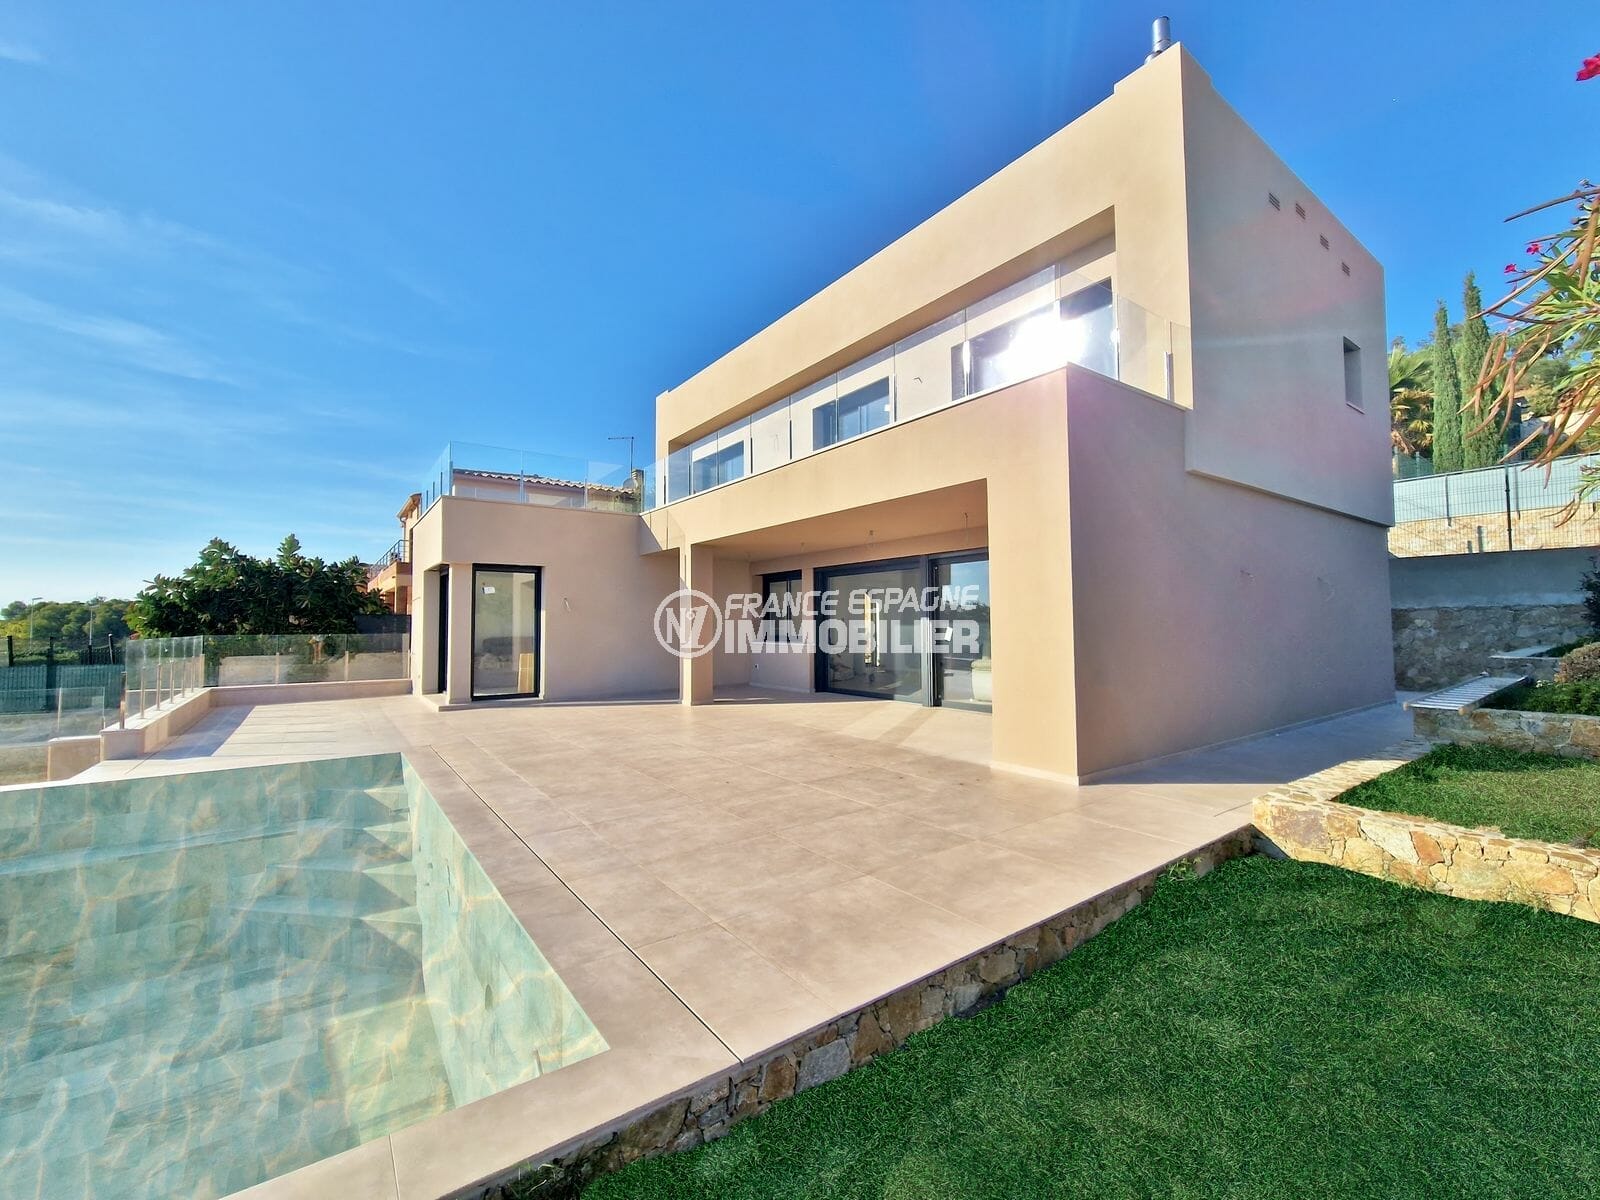 Near roses - contemporary villa with sea view, swimming pool, garage 100 m².